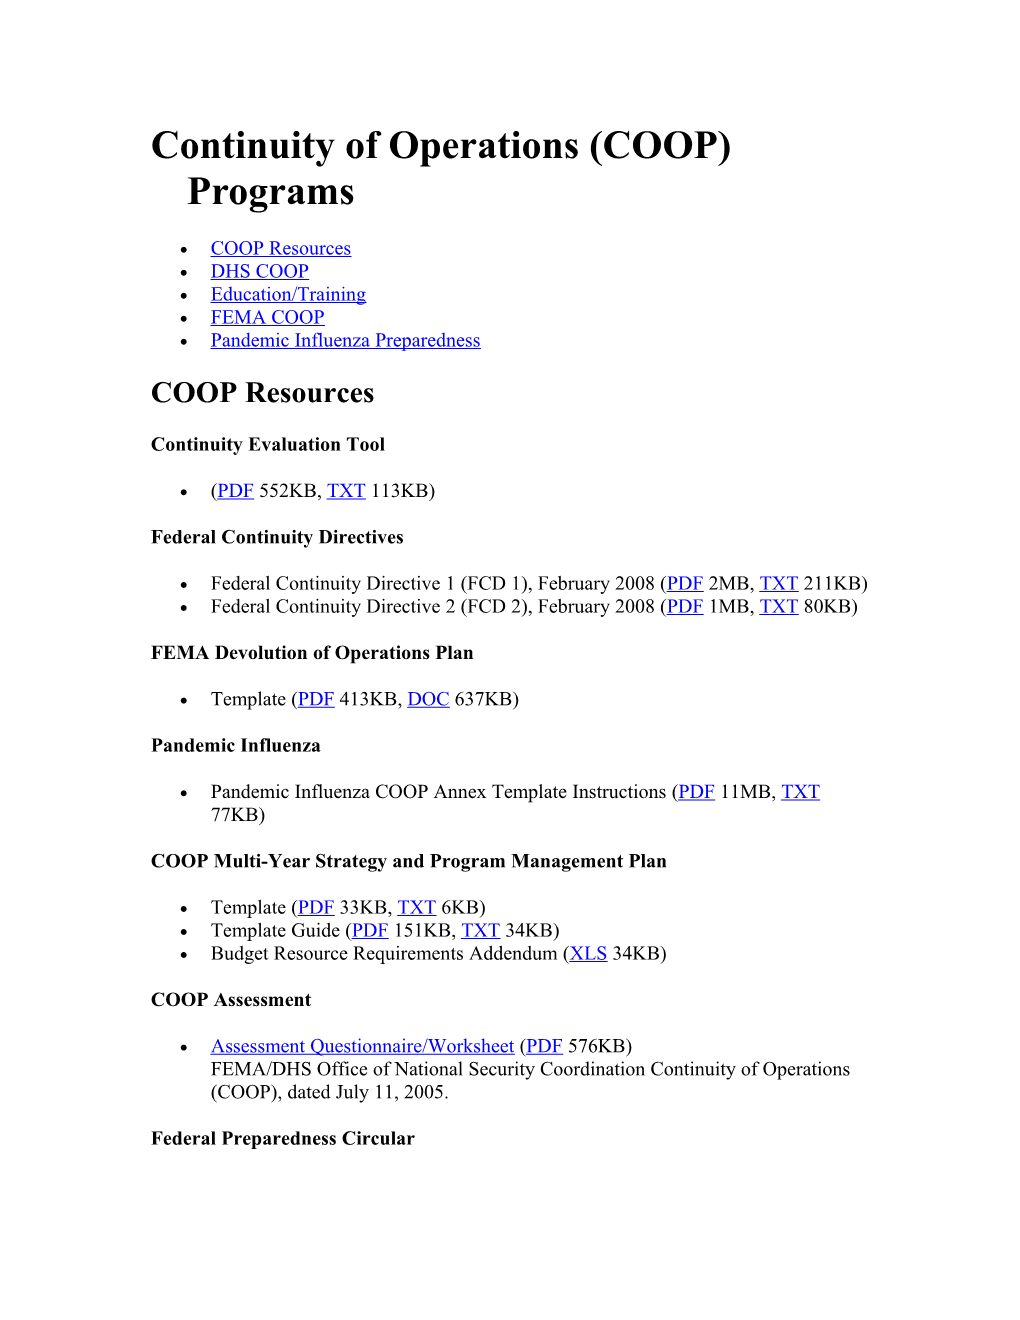 Continuity of Operations (COOP) Programs